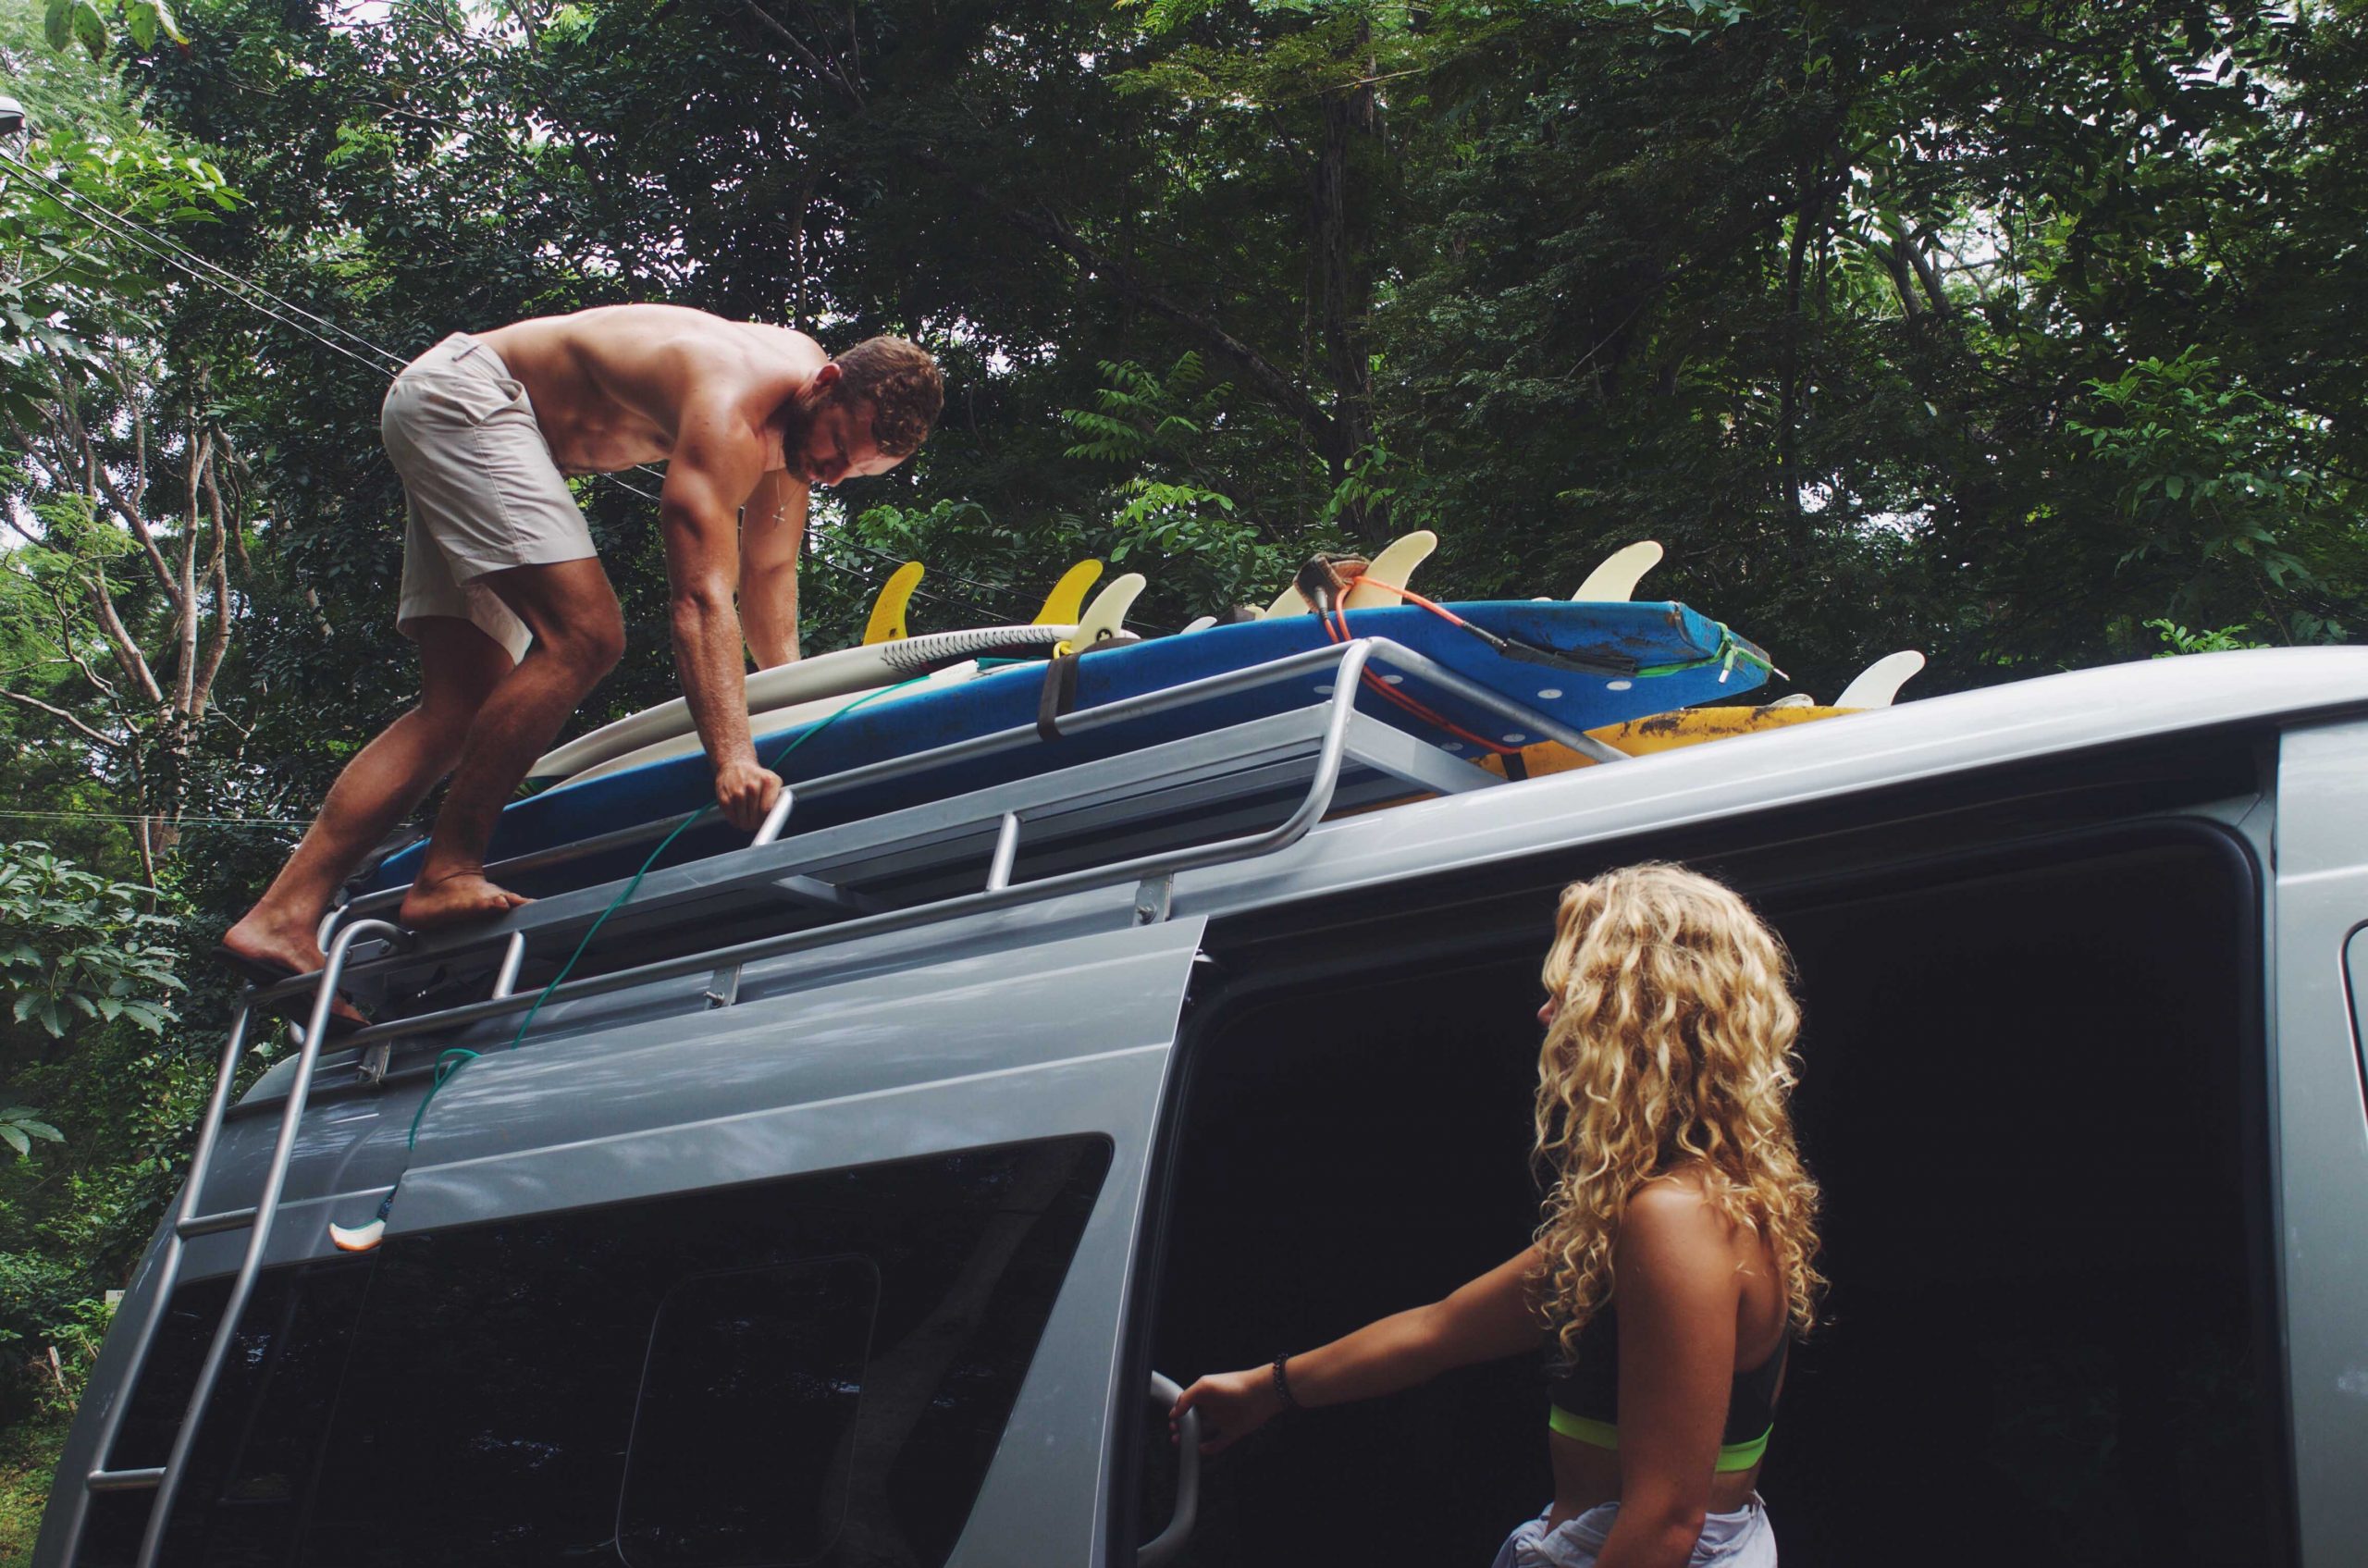 Dreamsea Costa Rica Surf Camp | backpacking, travel, hostel, surf, and yoga camp | Blog | picture of a man putting surfboards on roof of car and a beach girl